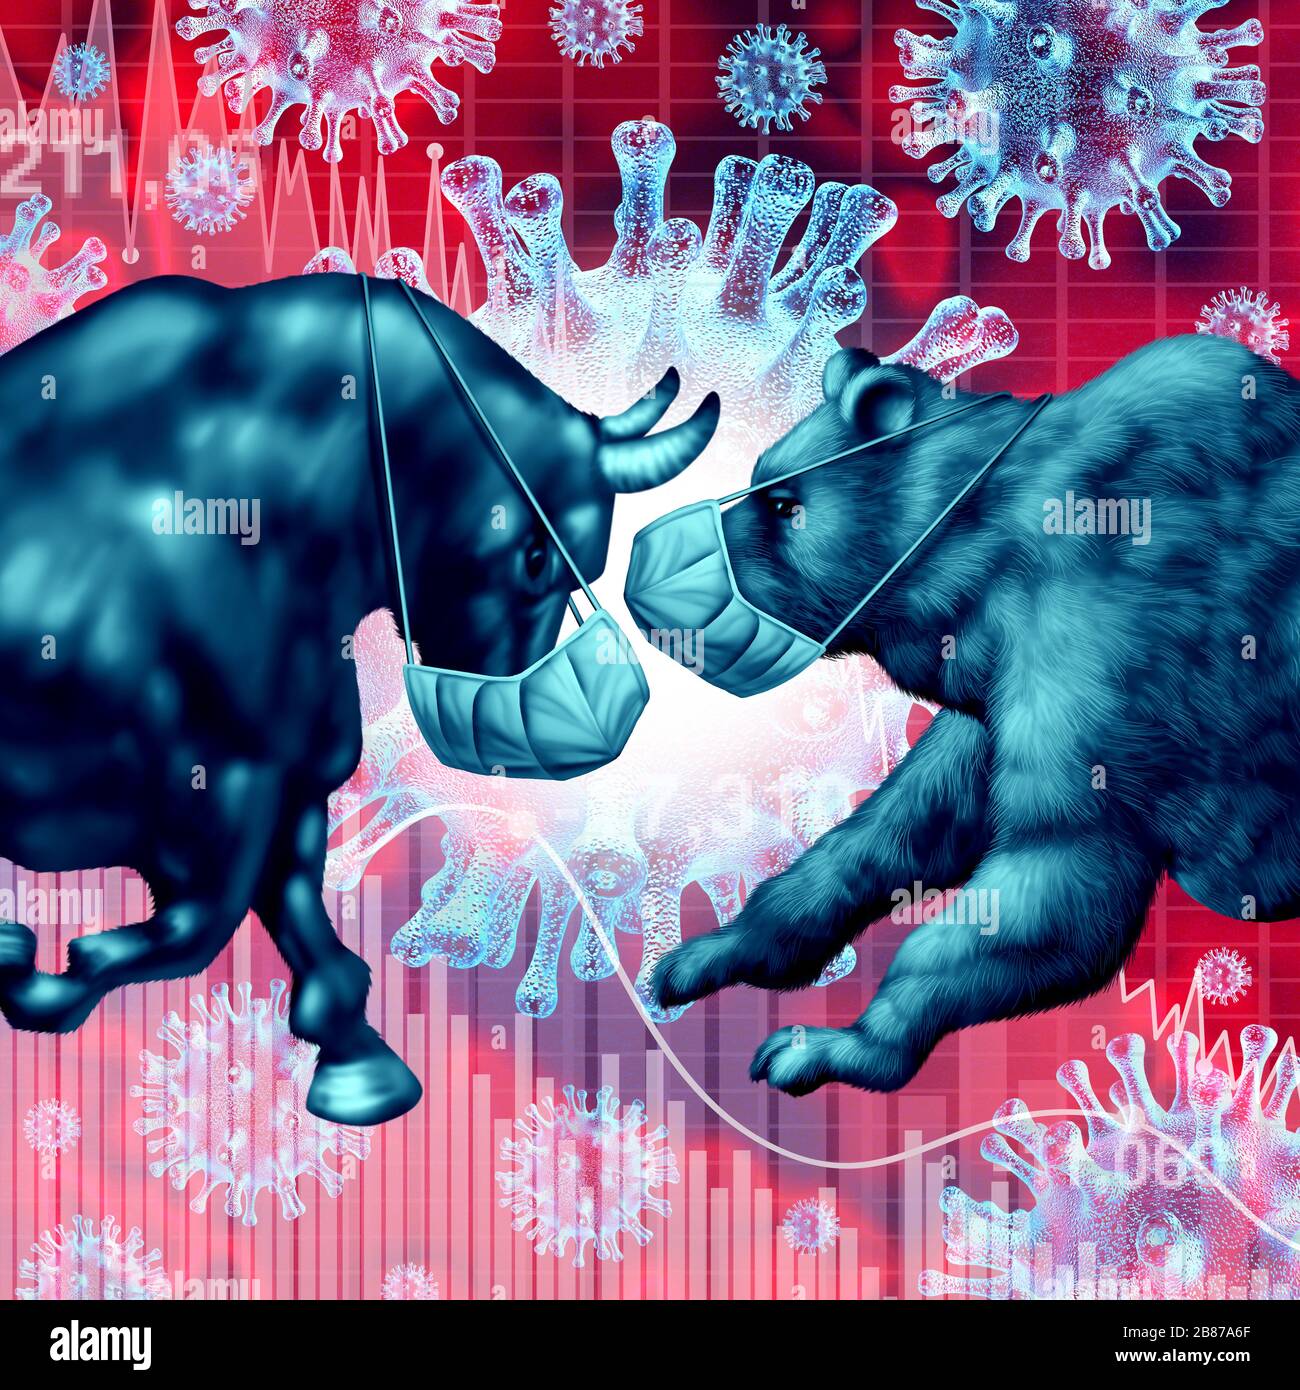 Stock market pandemic and virus fear or bull and bear economic crisis and sick financial health as a business recession concept for uncertainty. Stock Photo